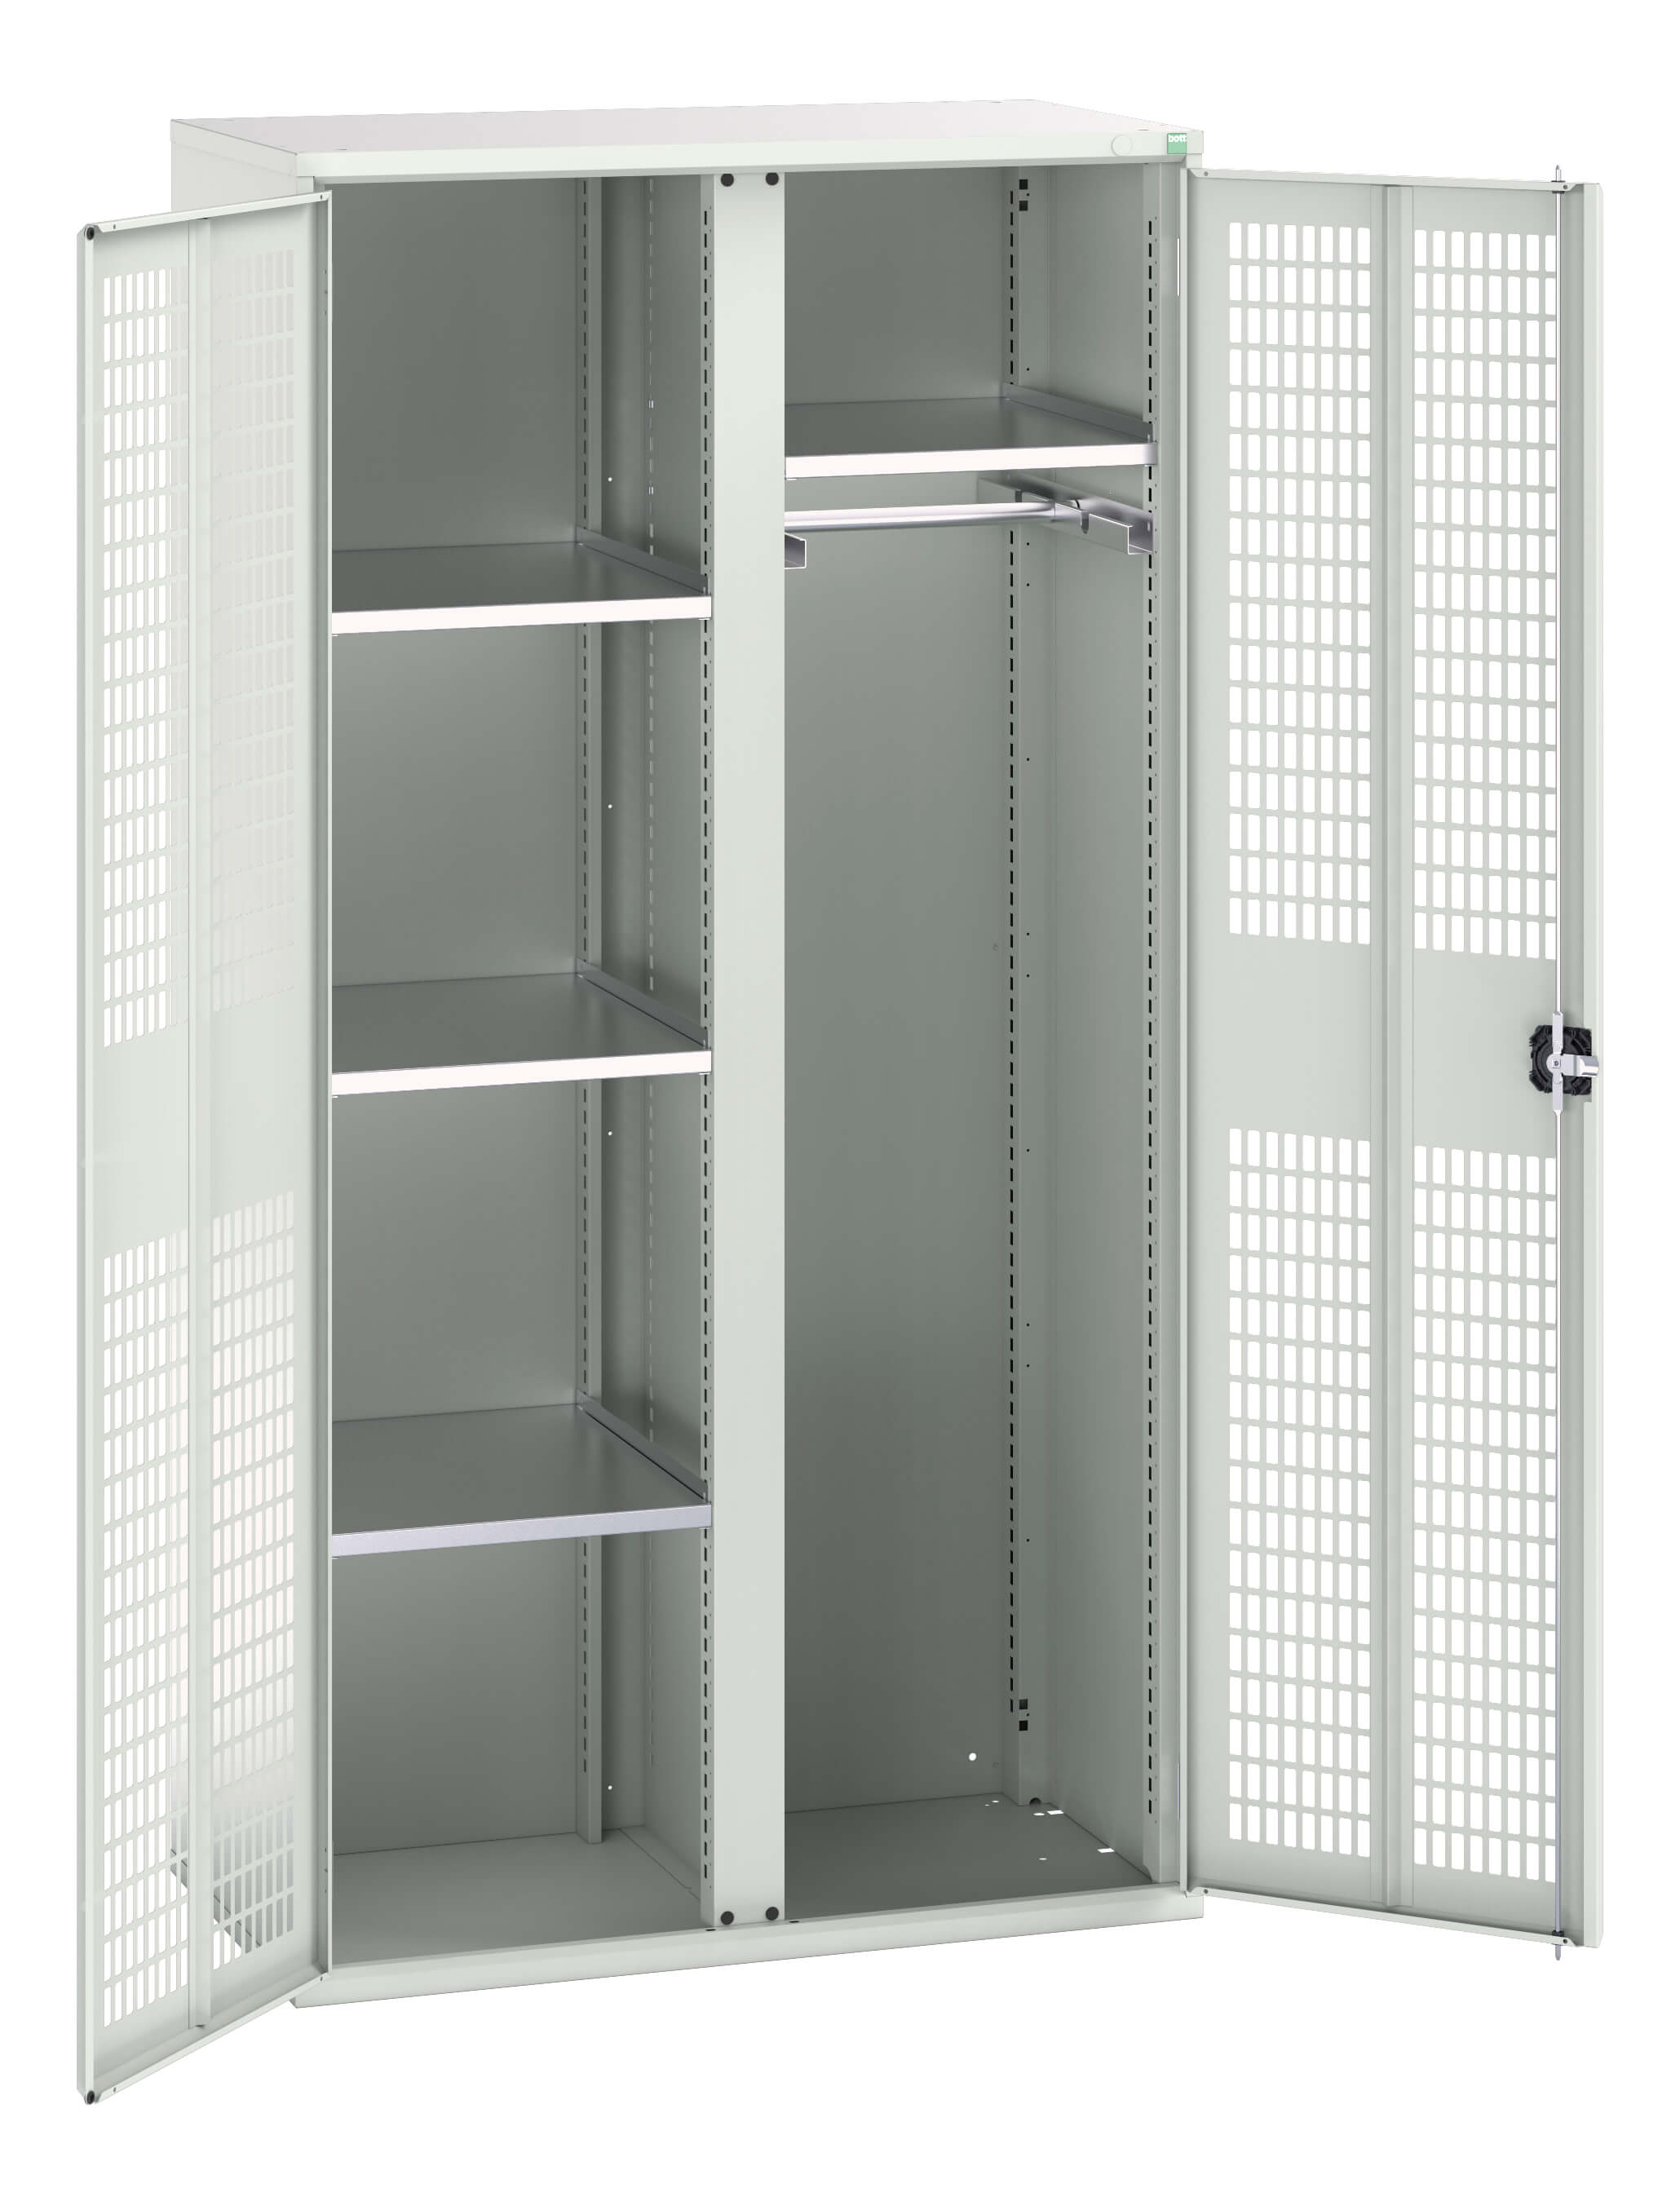 Bott Verso Ventilated Door Ppe / Janitorial Kitted Cupboard With Vertical Partition - 16926774.16